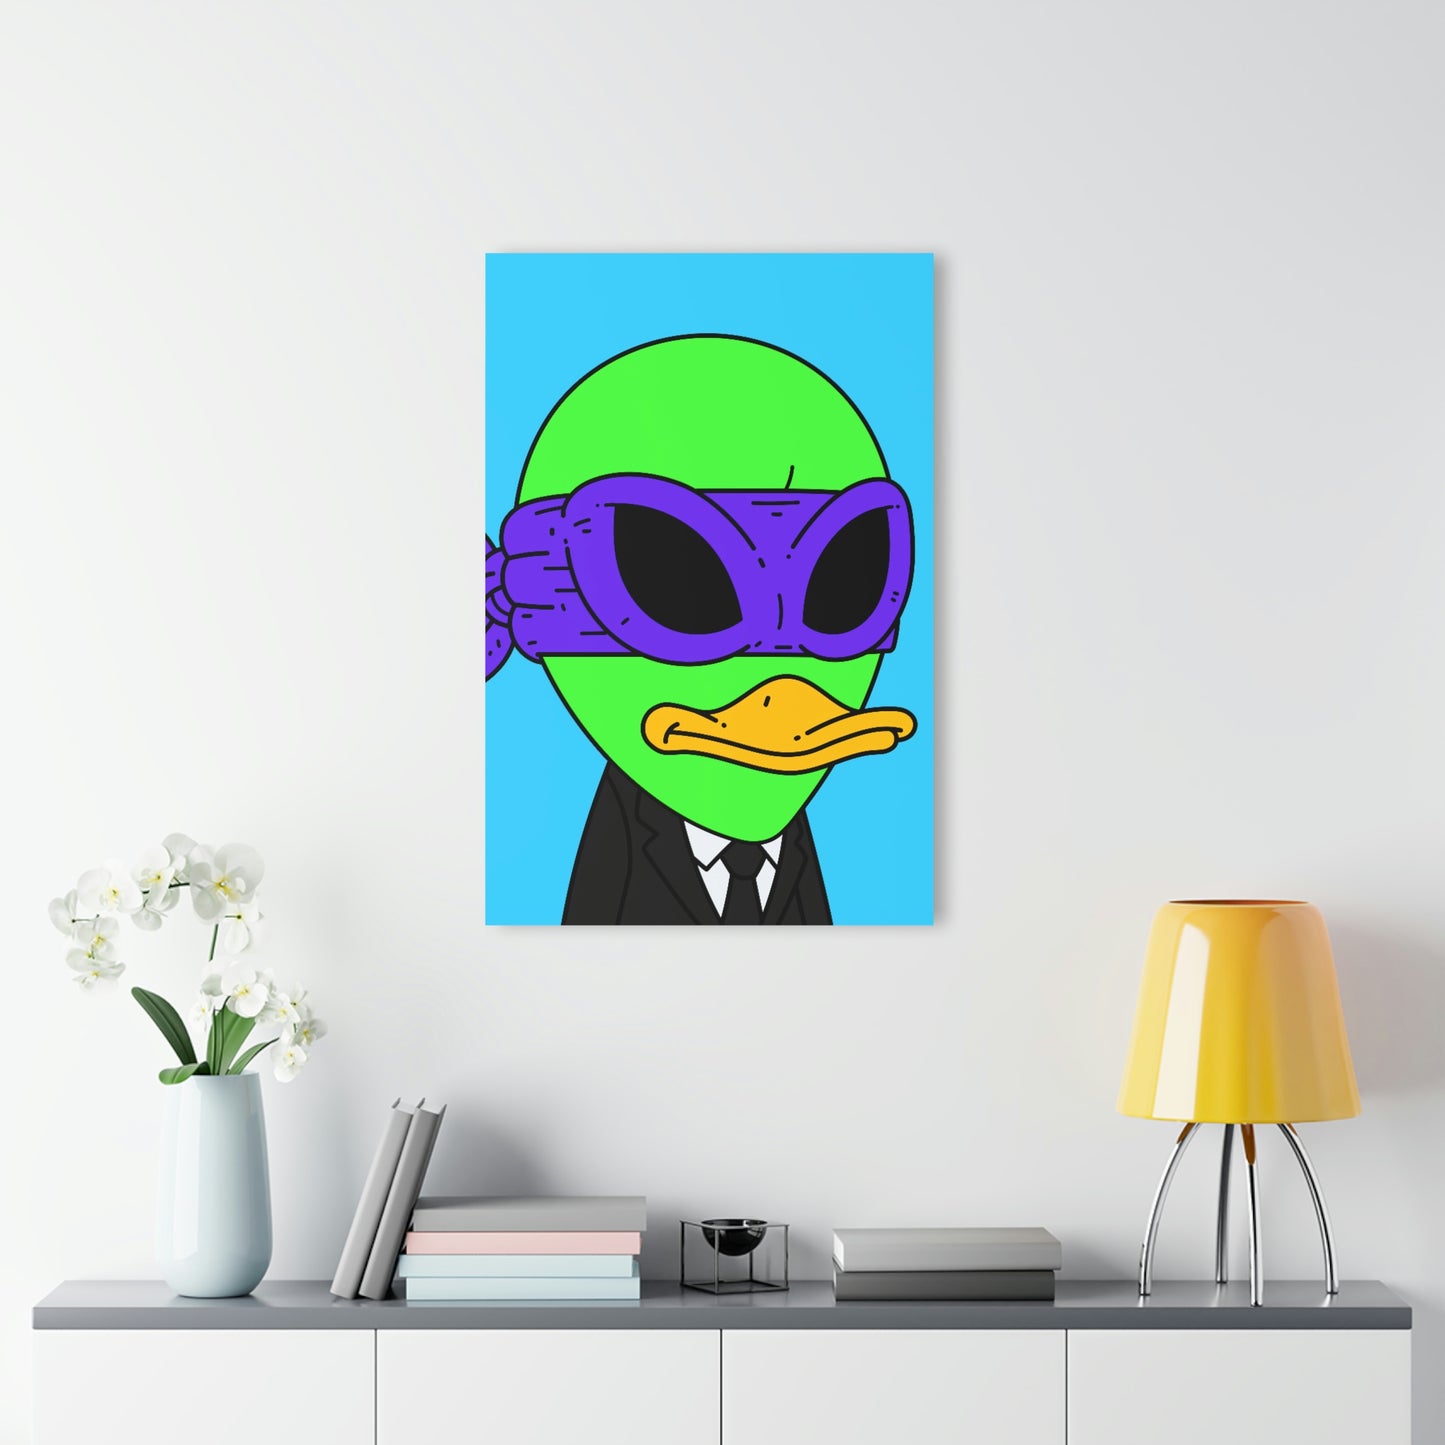 Alien Visitor 751 Acrylic Prints (French Cleat Hanging)